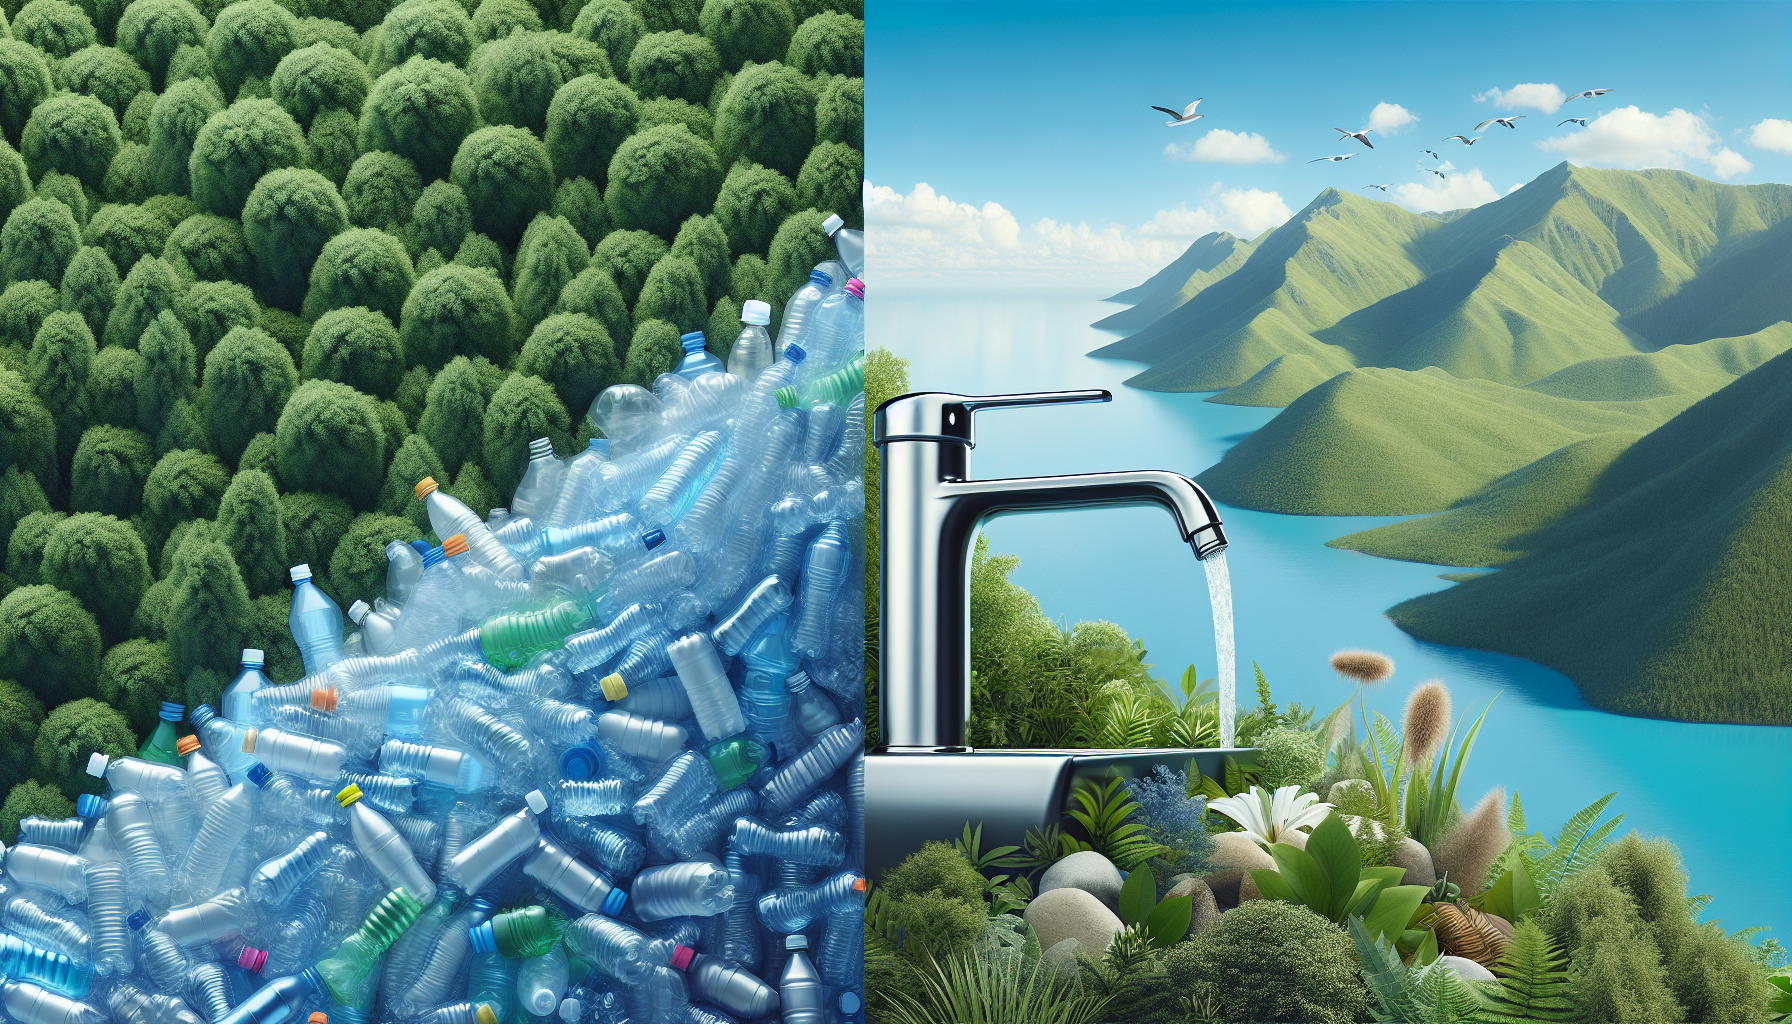 Comparison of single-use plastic bottles and a sparkling water tap in terms of environmental impact